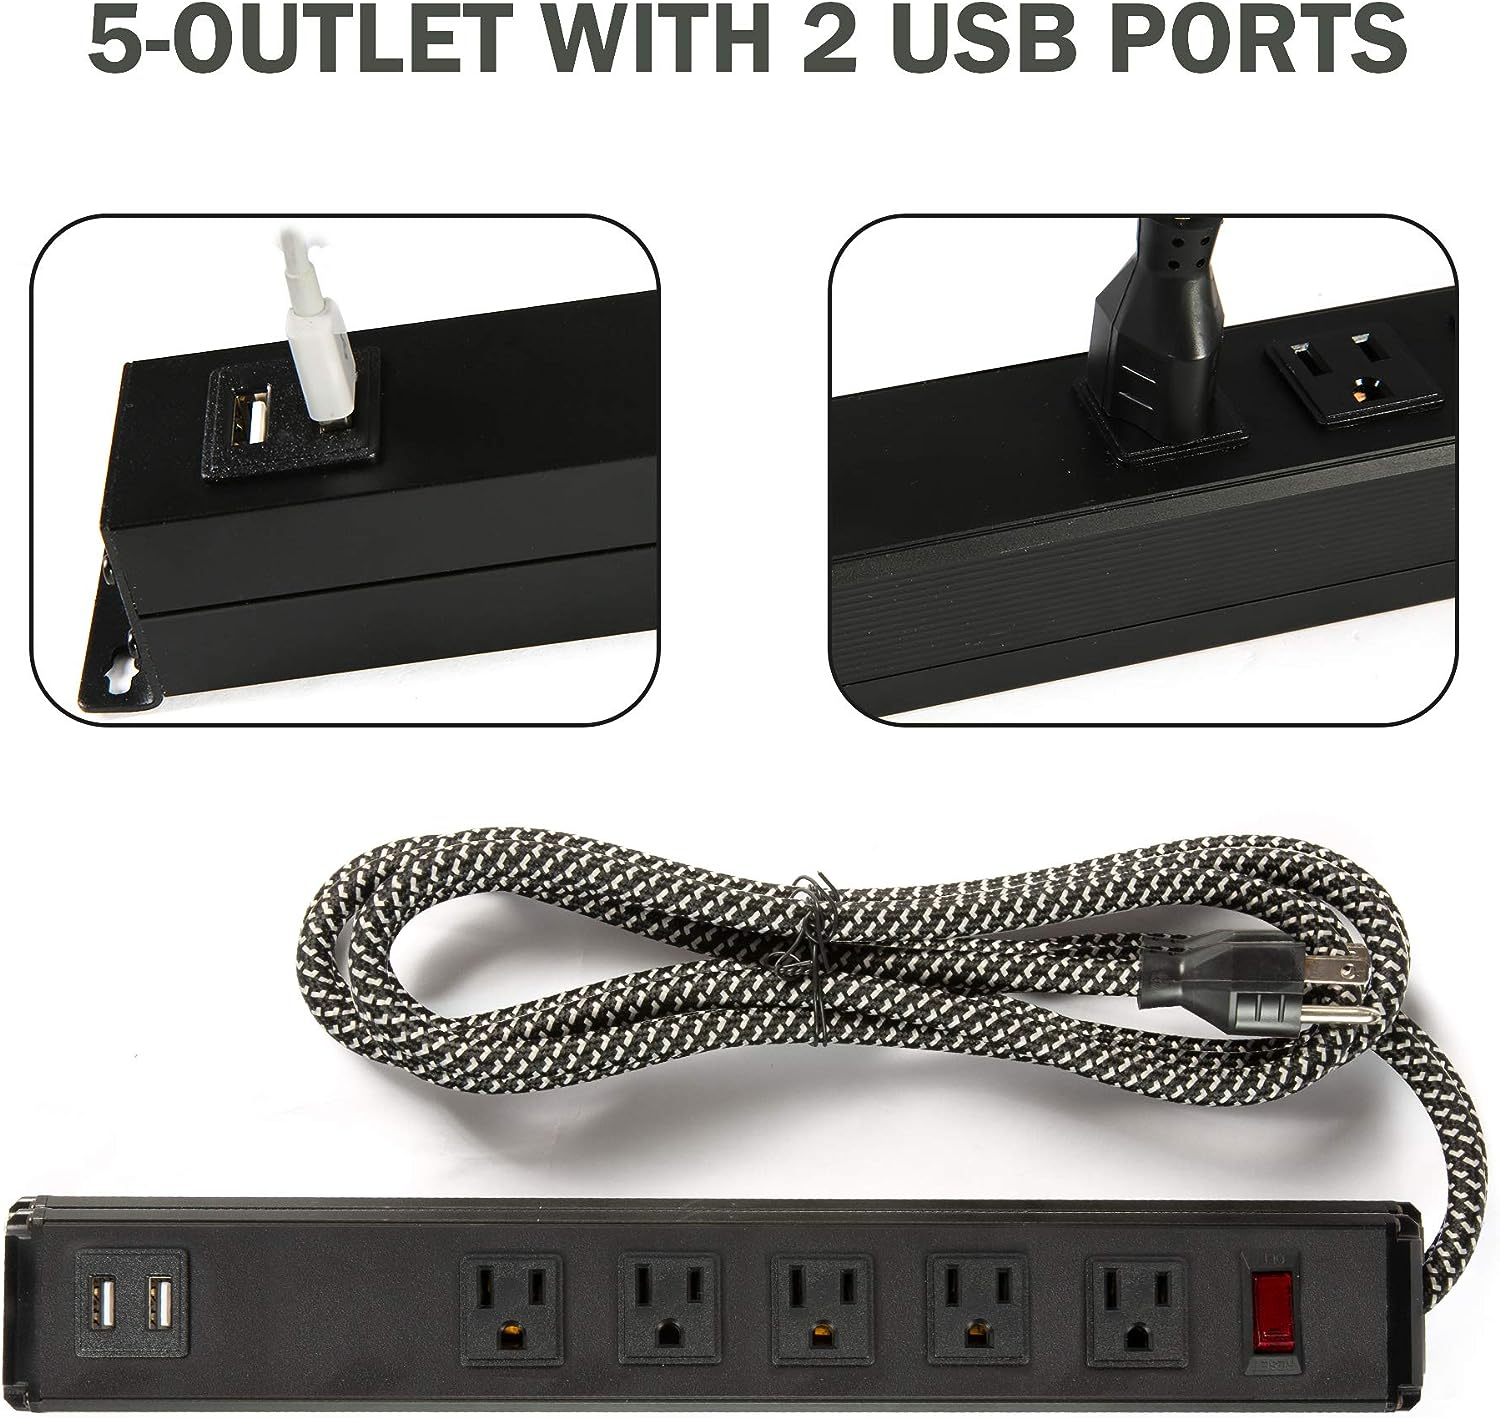 Power Strip 2PCS Surge Protector 5-Outlet with 2 USB Ports(5V/2.4A), 6ft Heavy-Duty Braided Extension Cords| karmasfar.us